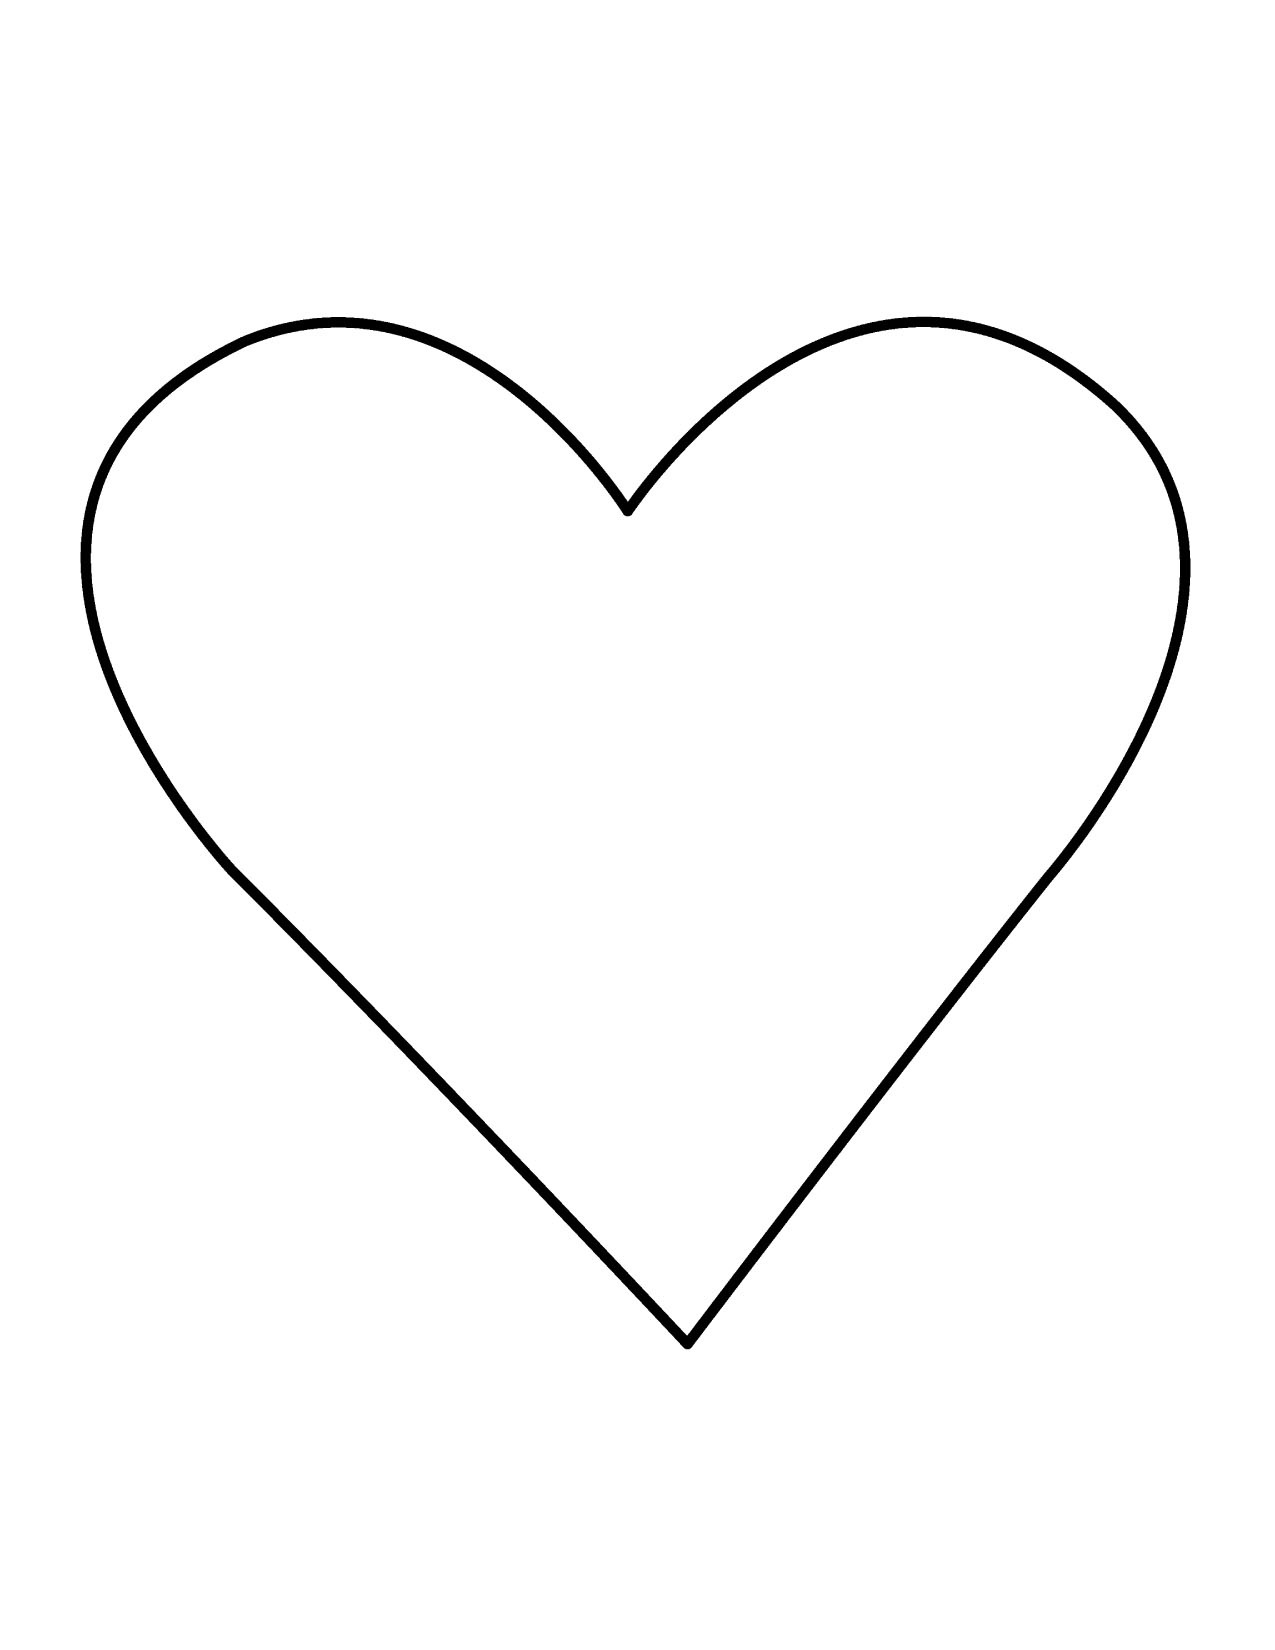 Heart  black and white hearts heart clipart black and white 3 clipartix